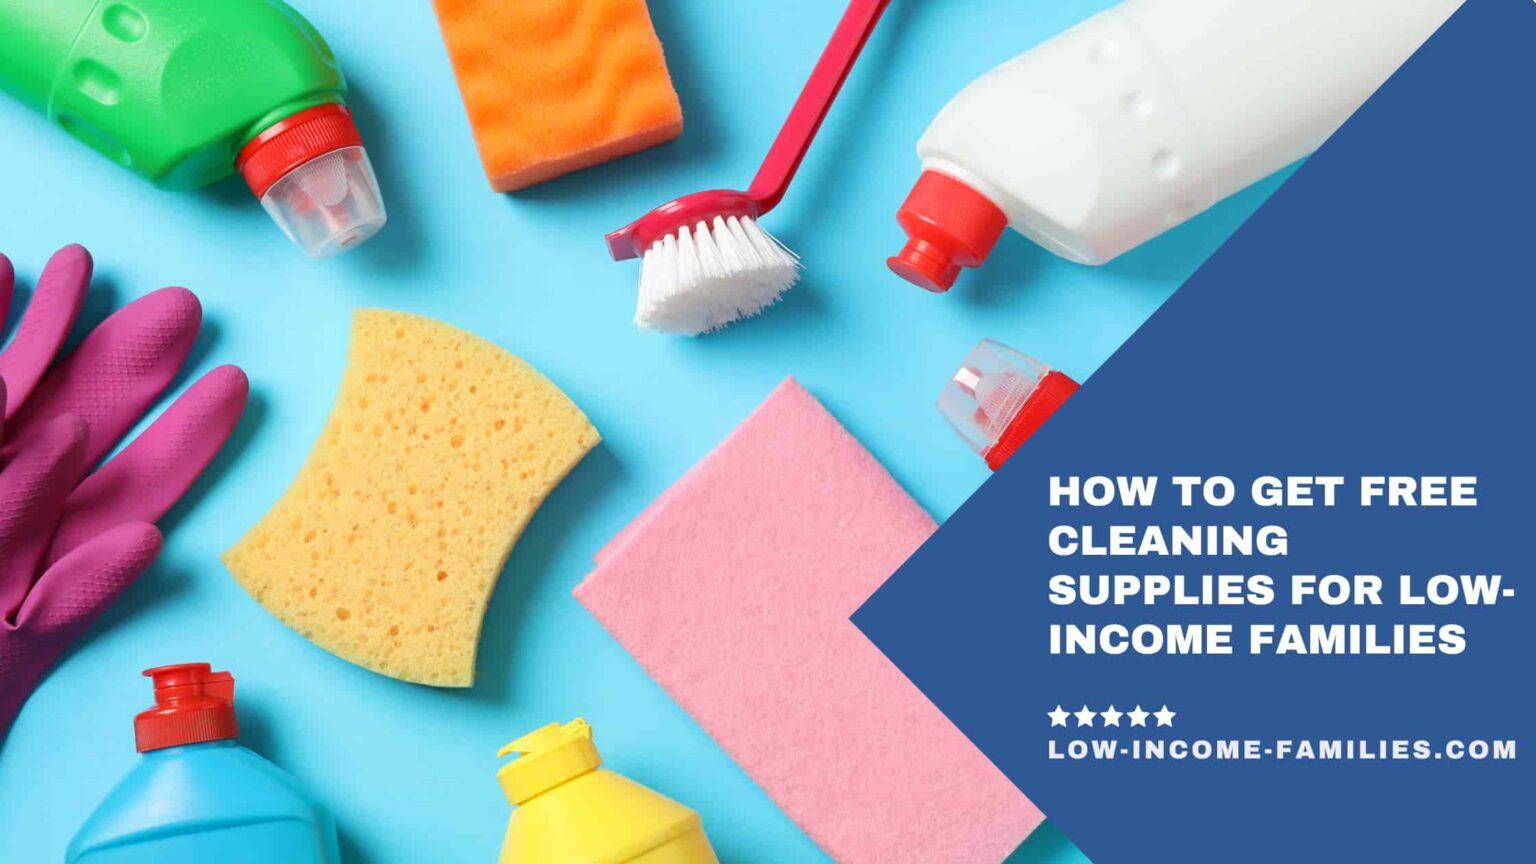 how-to-get-free-cleaning-supplies-for-low-income-families-low-income